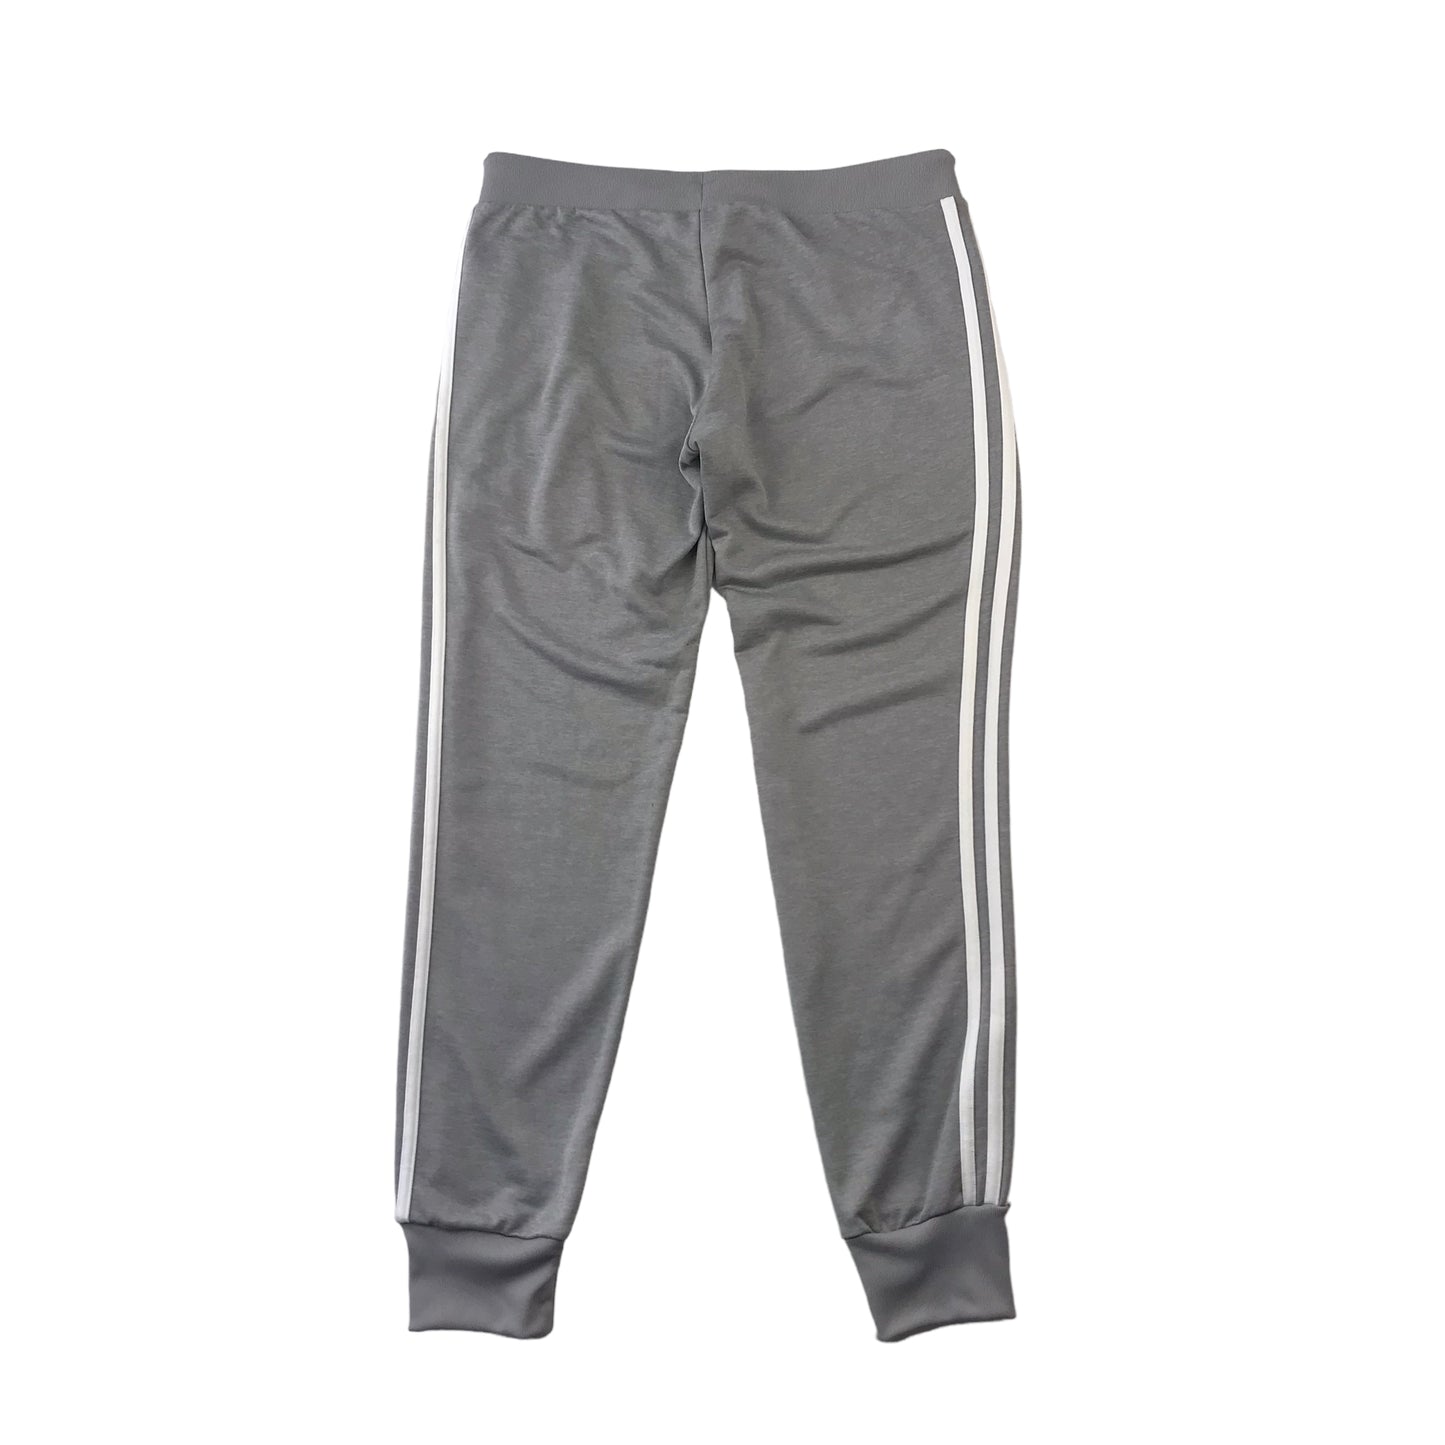 Adidas Grey Low Rise Joggers Women's Size 14